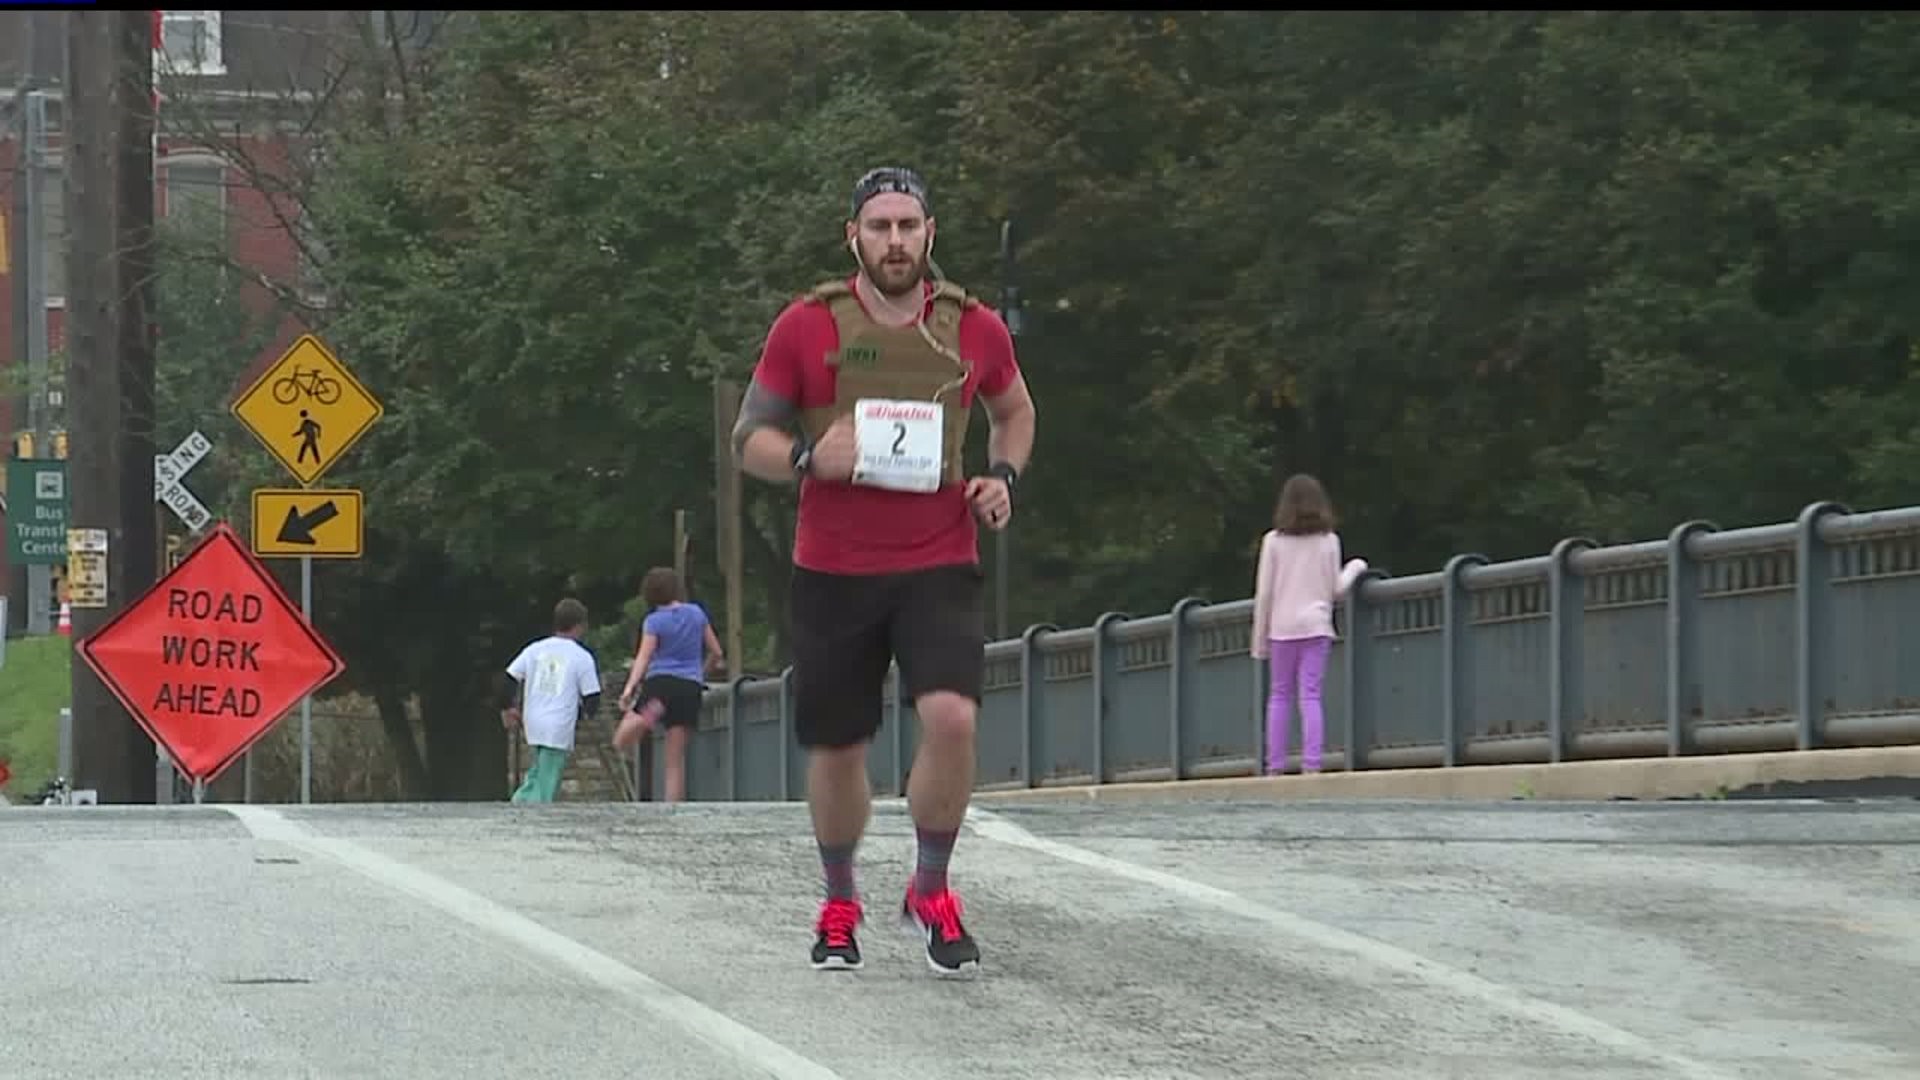 Community puts on running shoes for a good cause in York